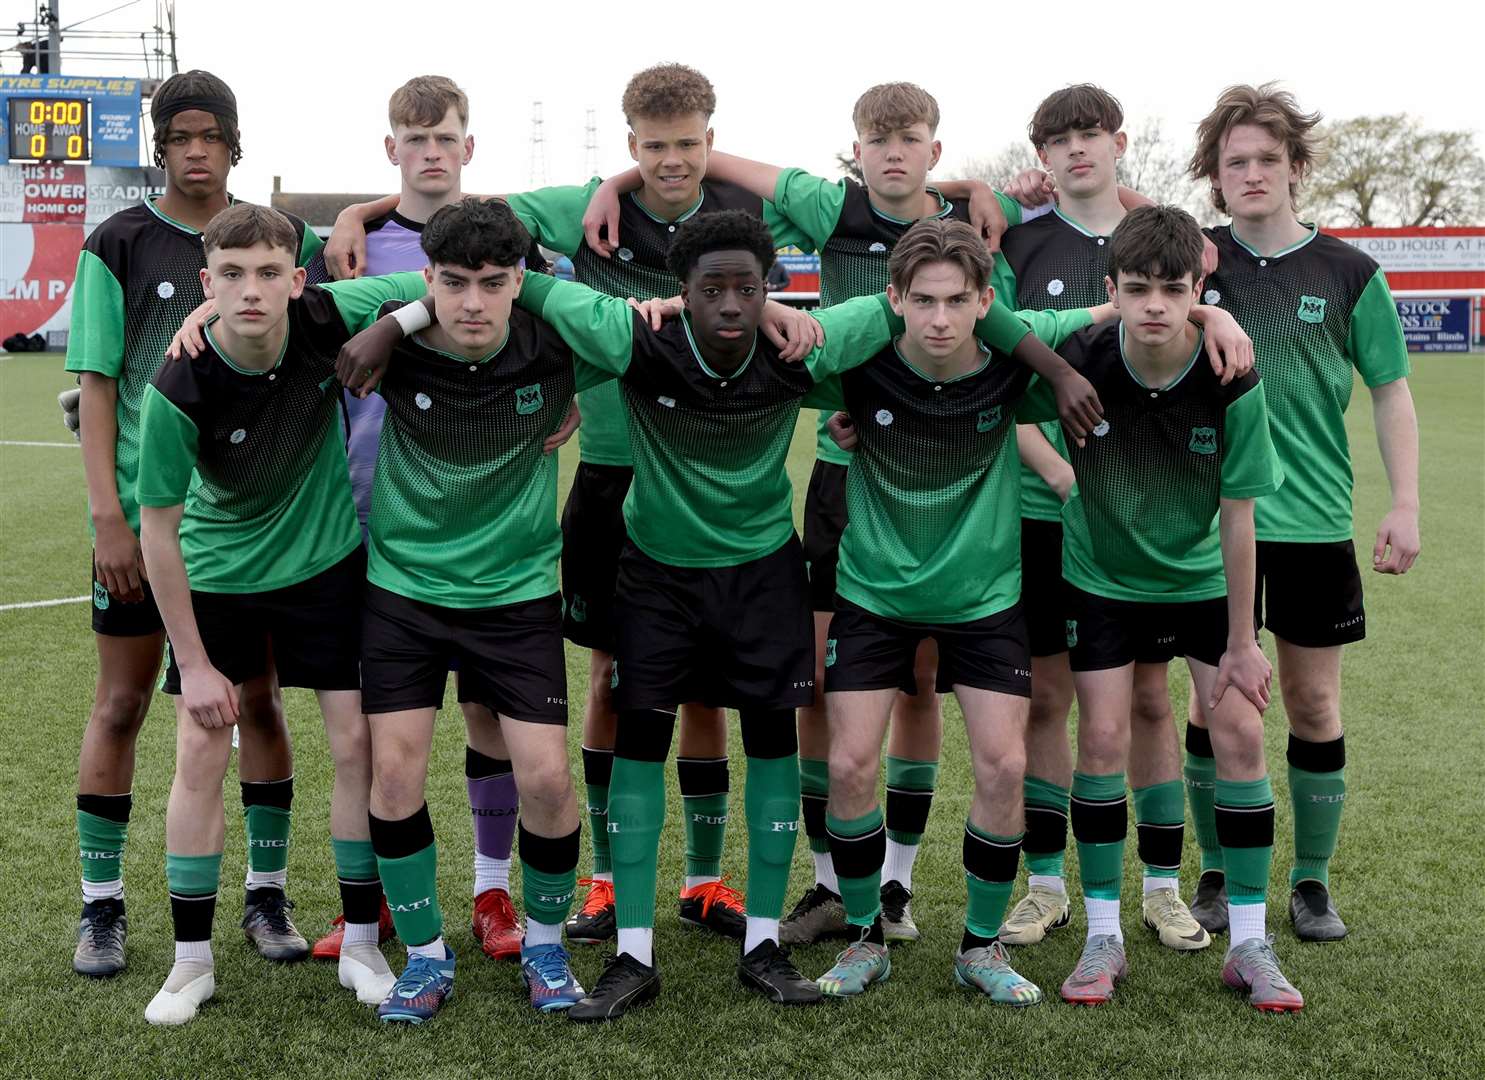 Greenway Aces - beaten on penalties in the Kent Merit Under-15 Boys Cup Final. Picture: PSP Images